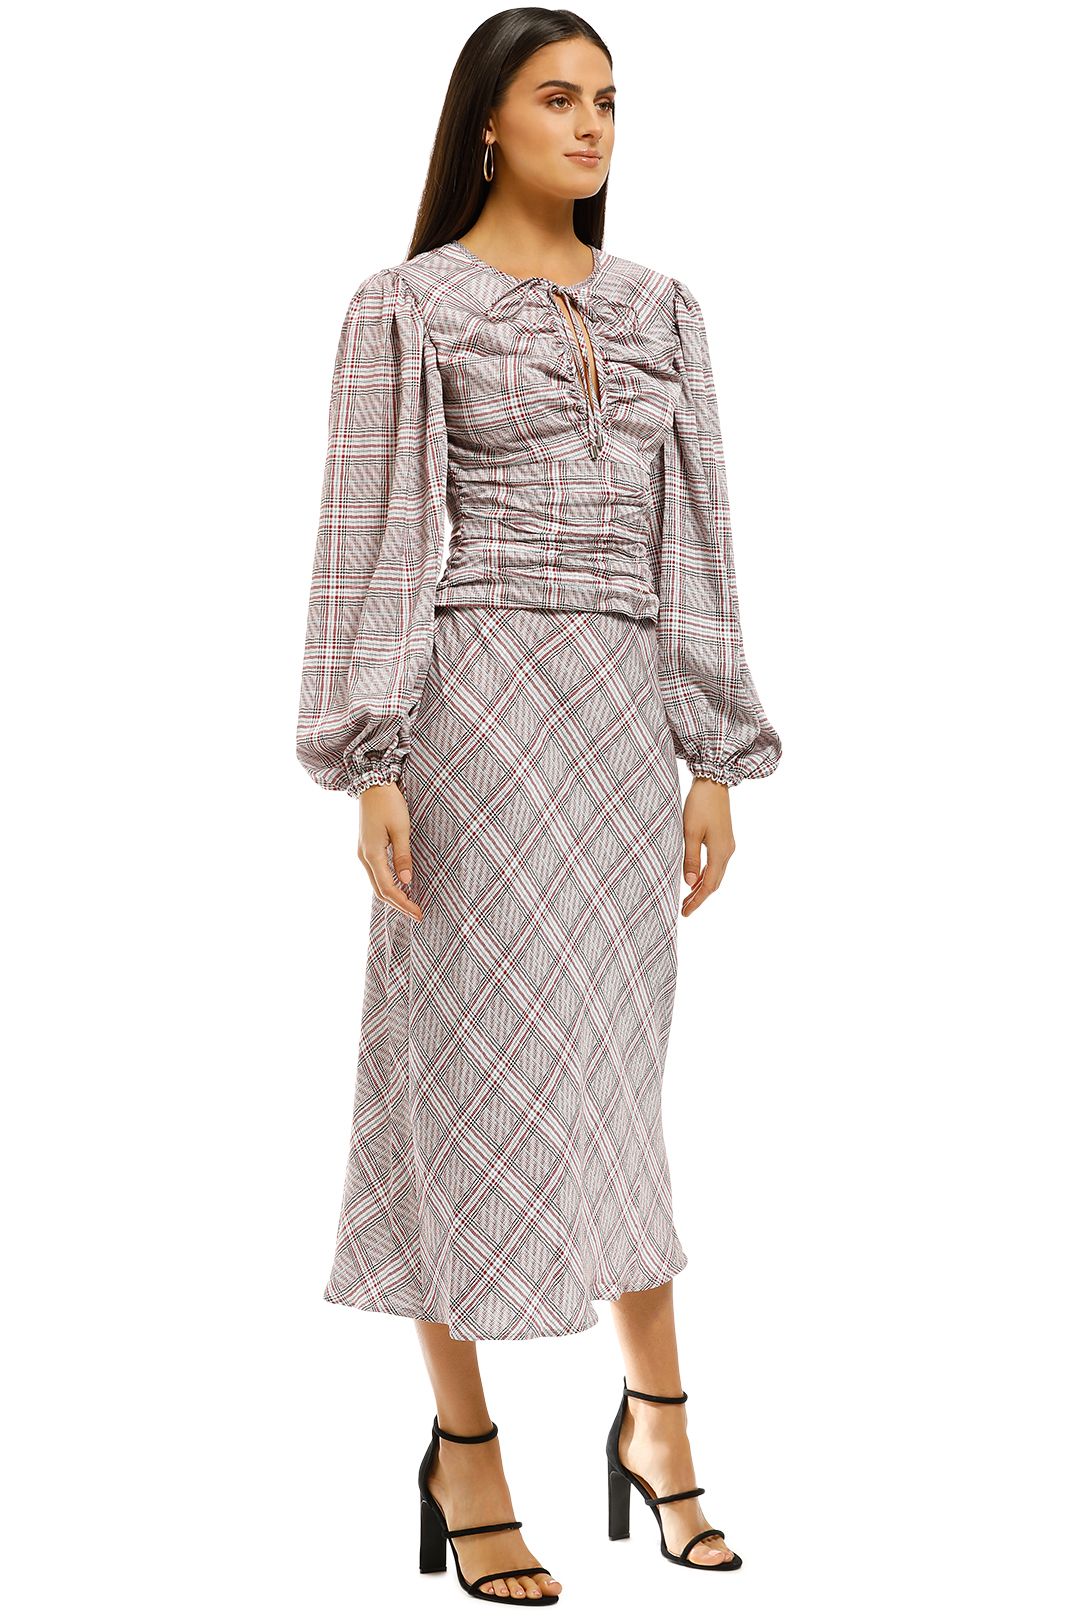 CMEO-Collective-No-Time-Skirt-Plaid-Side